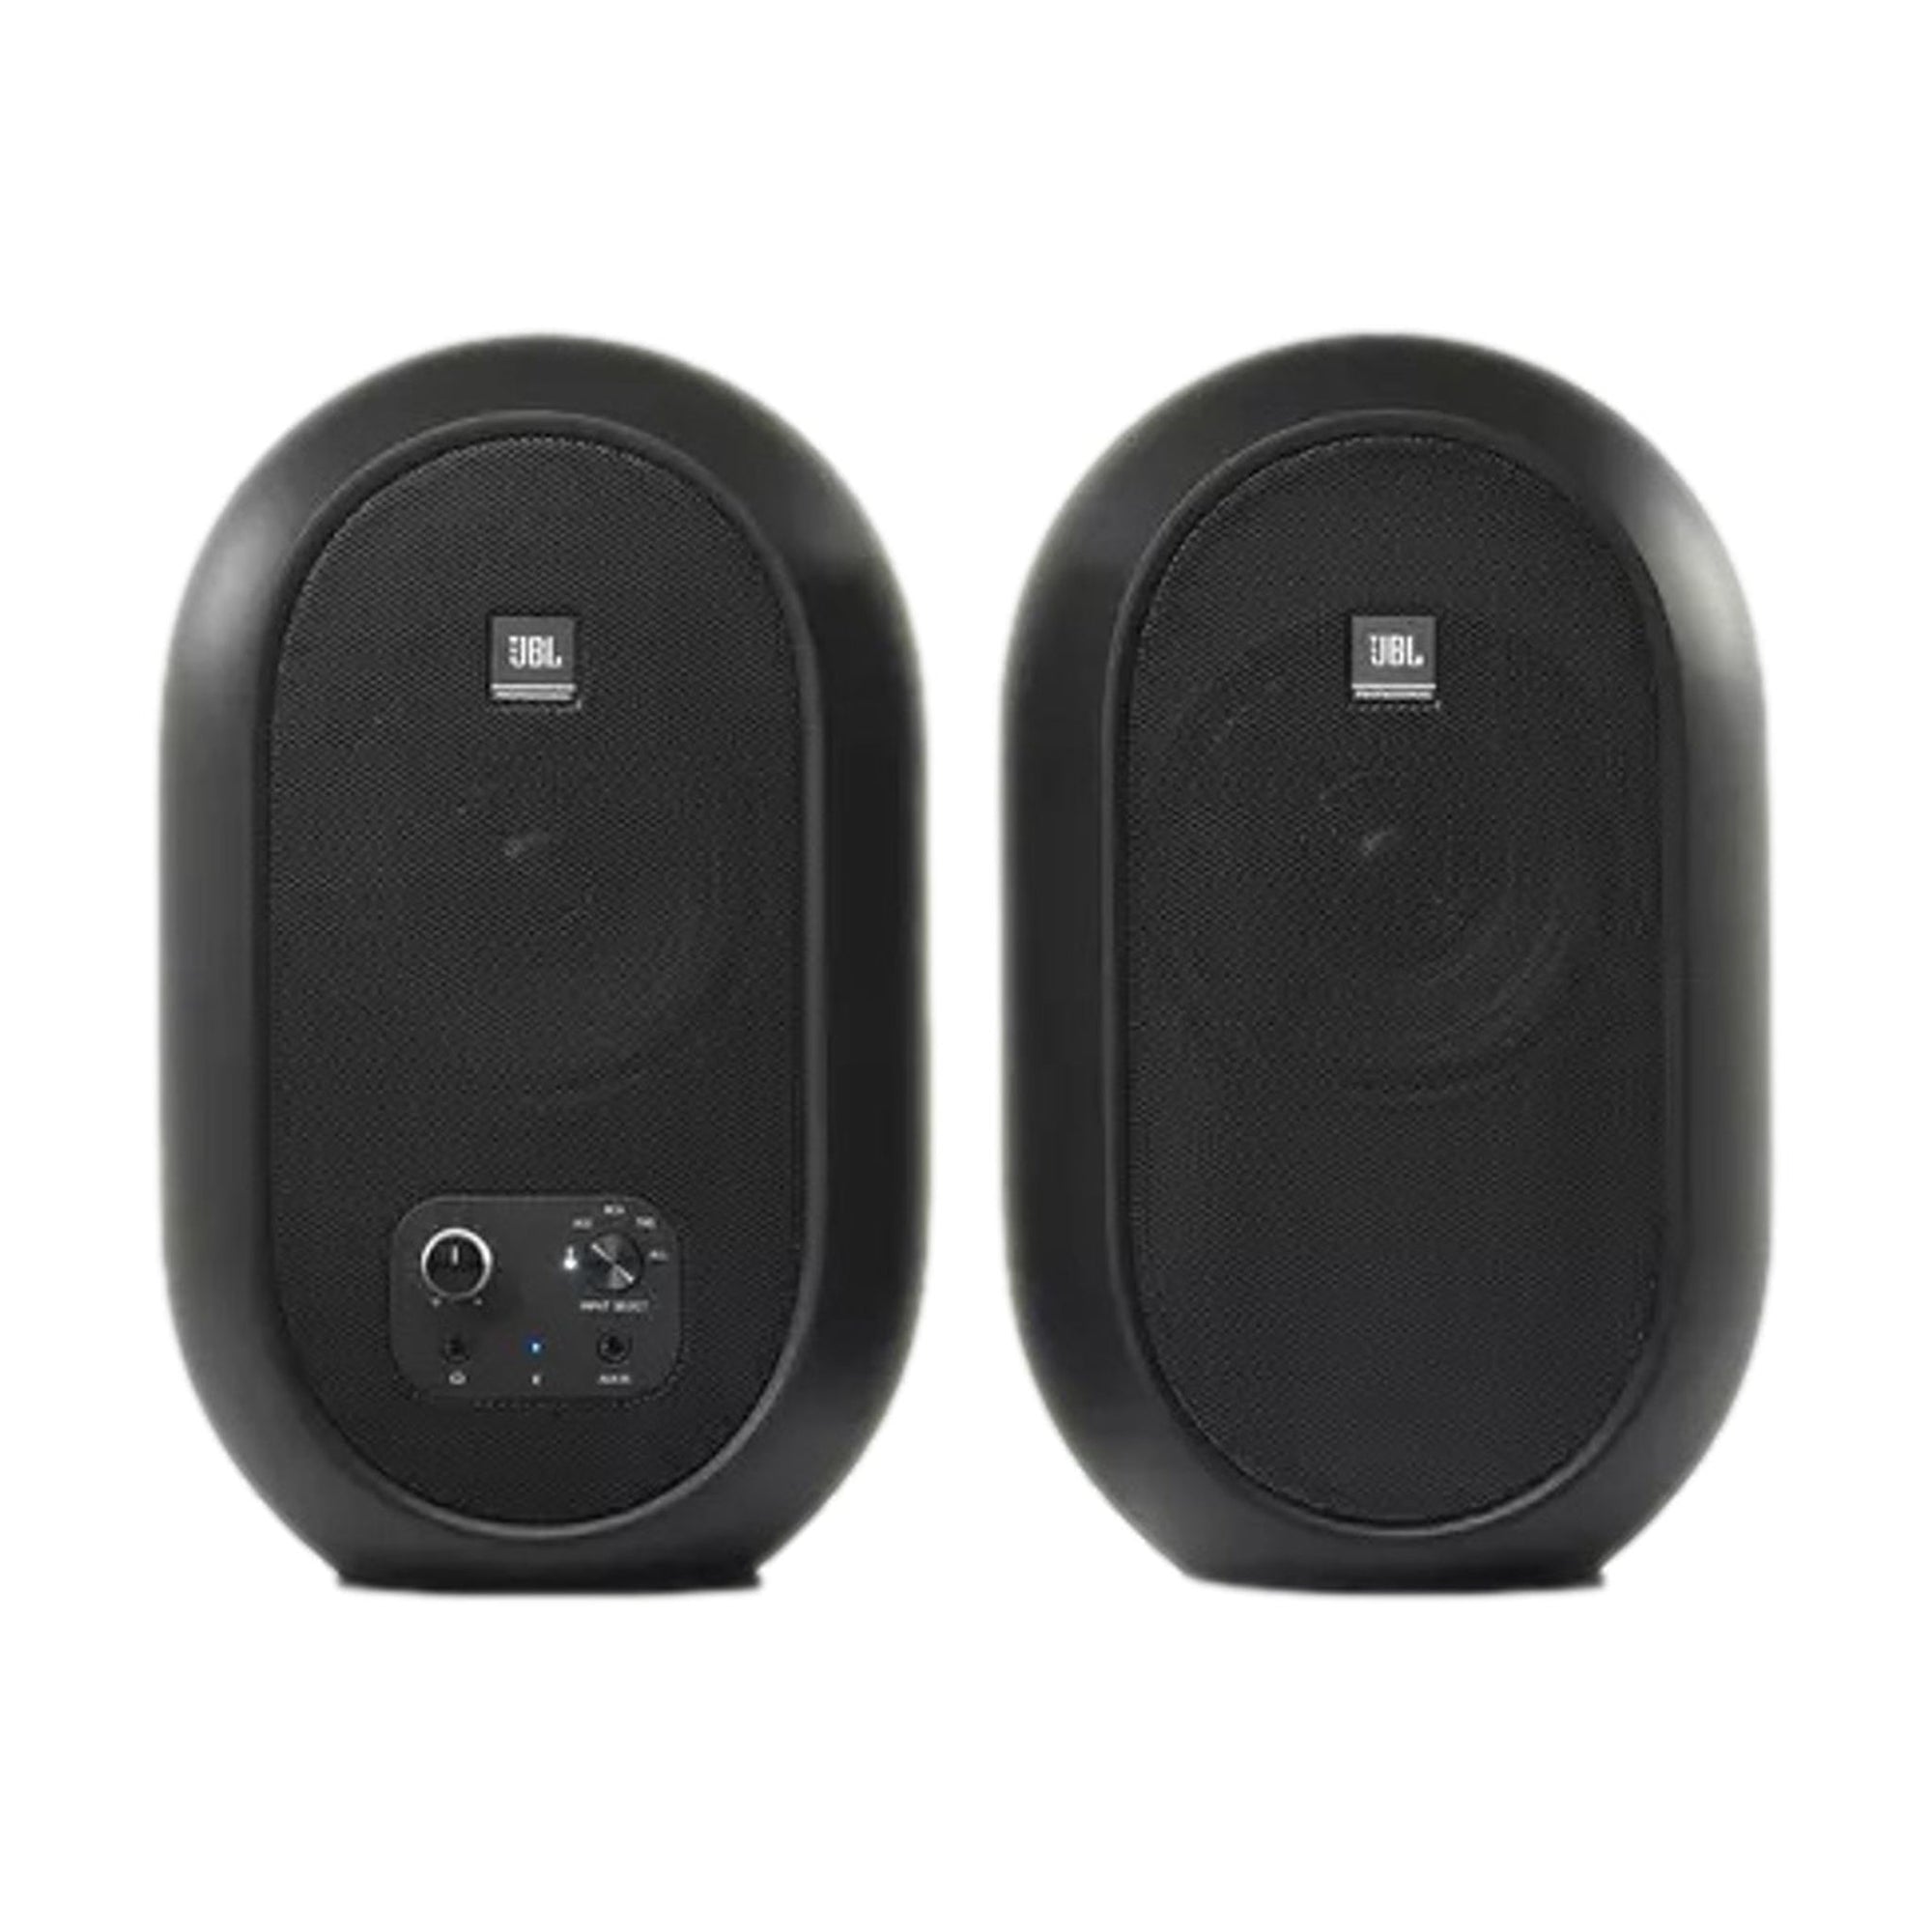 JBL 104-BT compact reference monitors with Bluetooth, the newest models in the 1 Series line, draw from seven decades of JBL Professional engineering to deliver the truest, most accurate sound in their class.